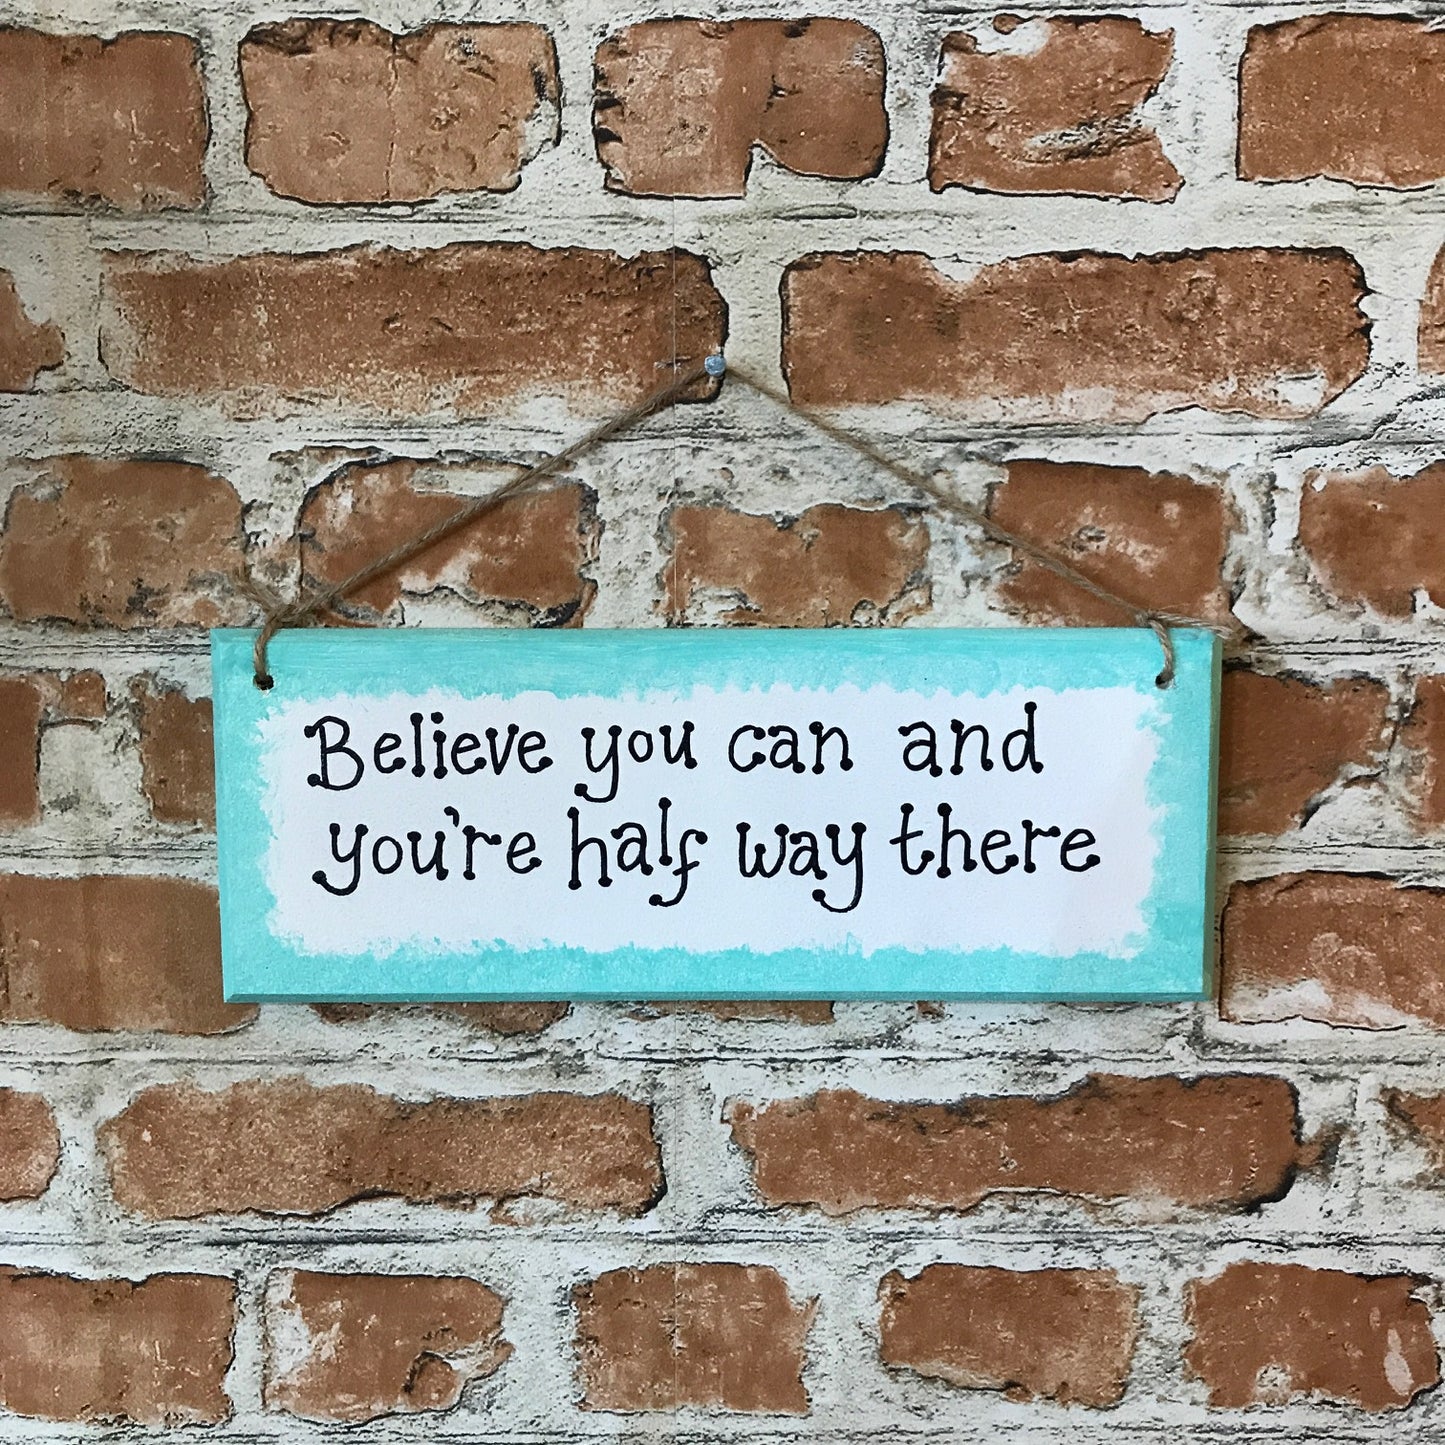 Believe you can and you're half way there - Handmade Wooden Plaque